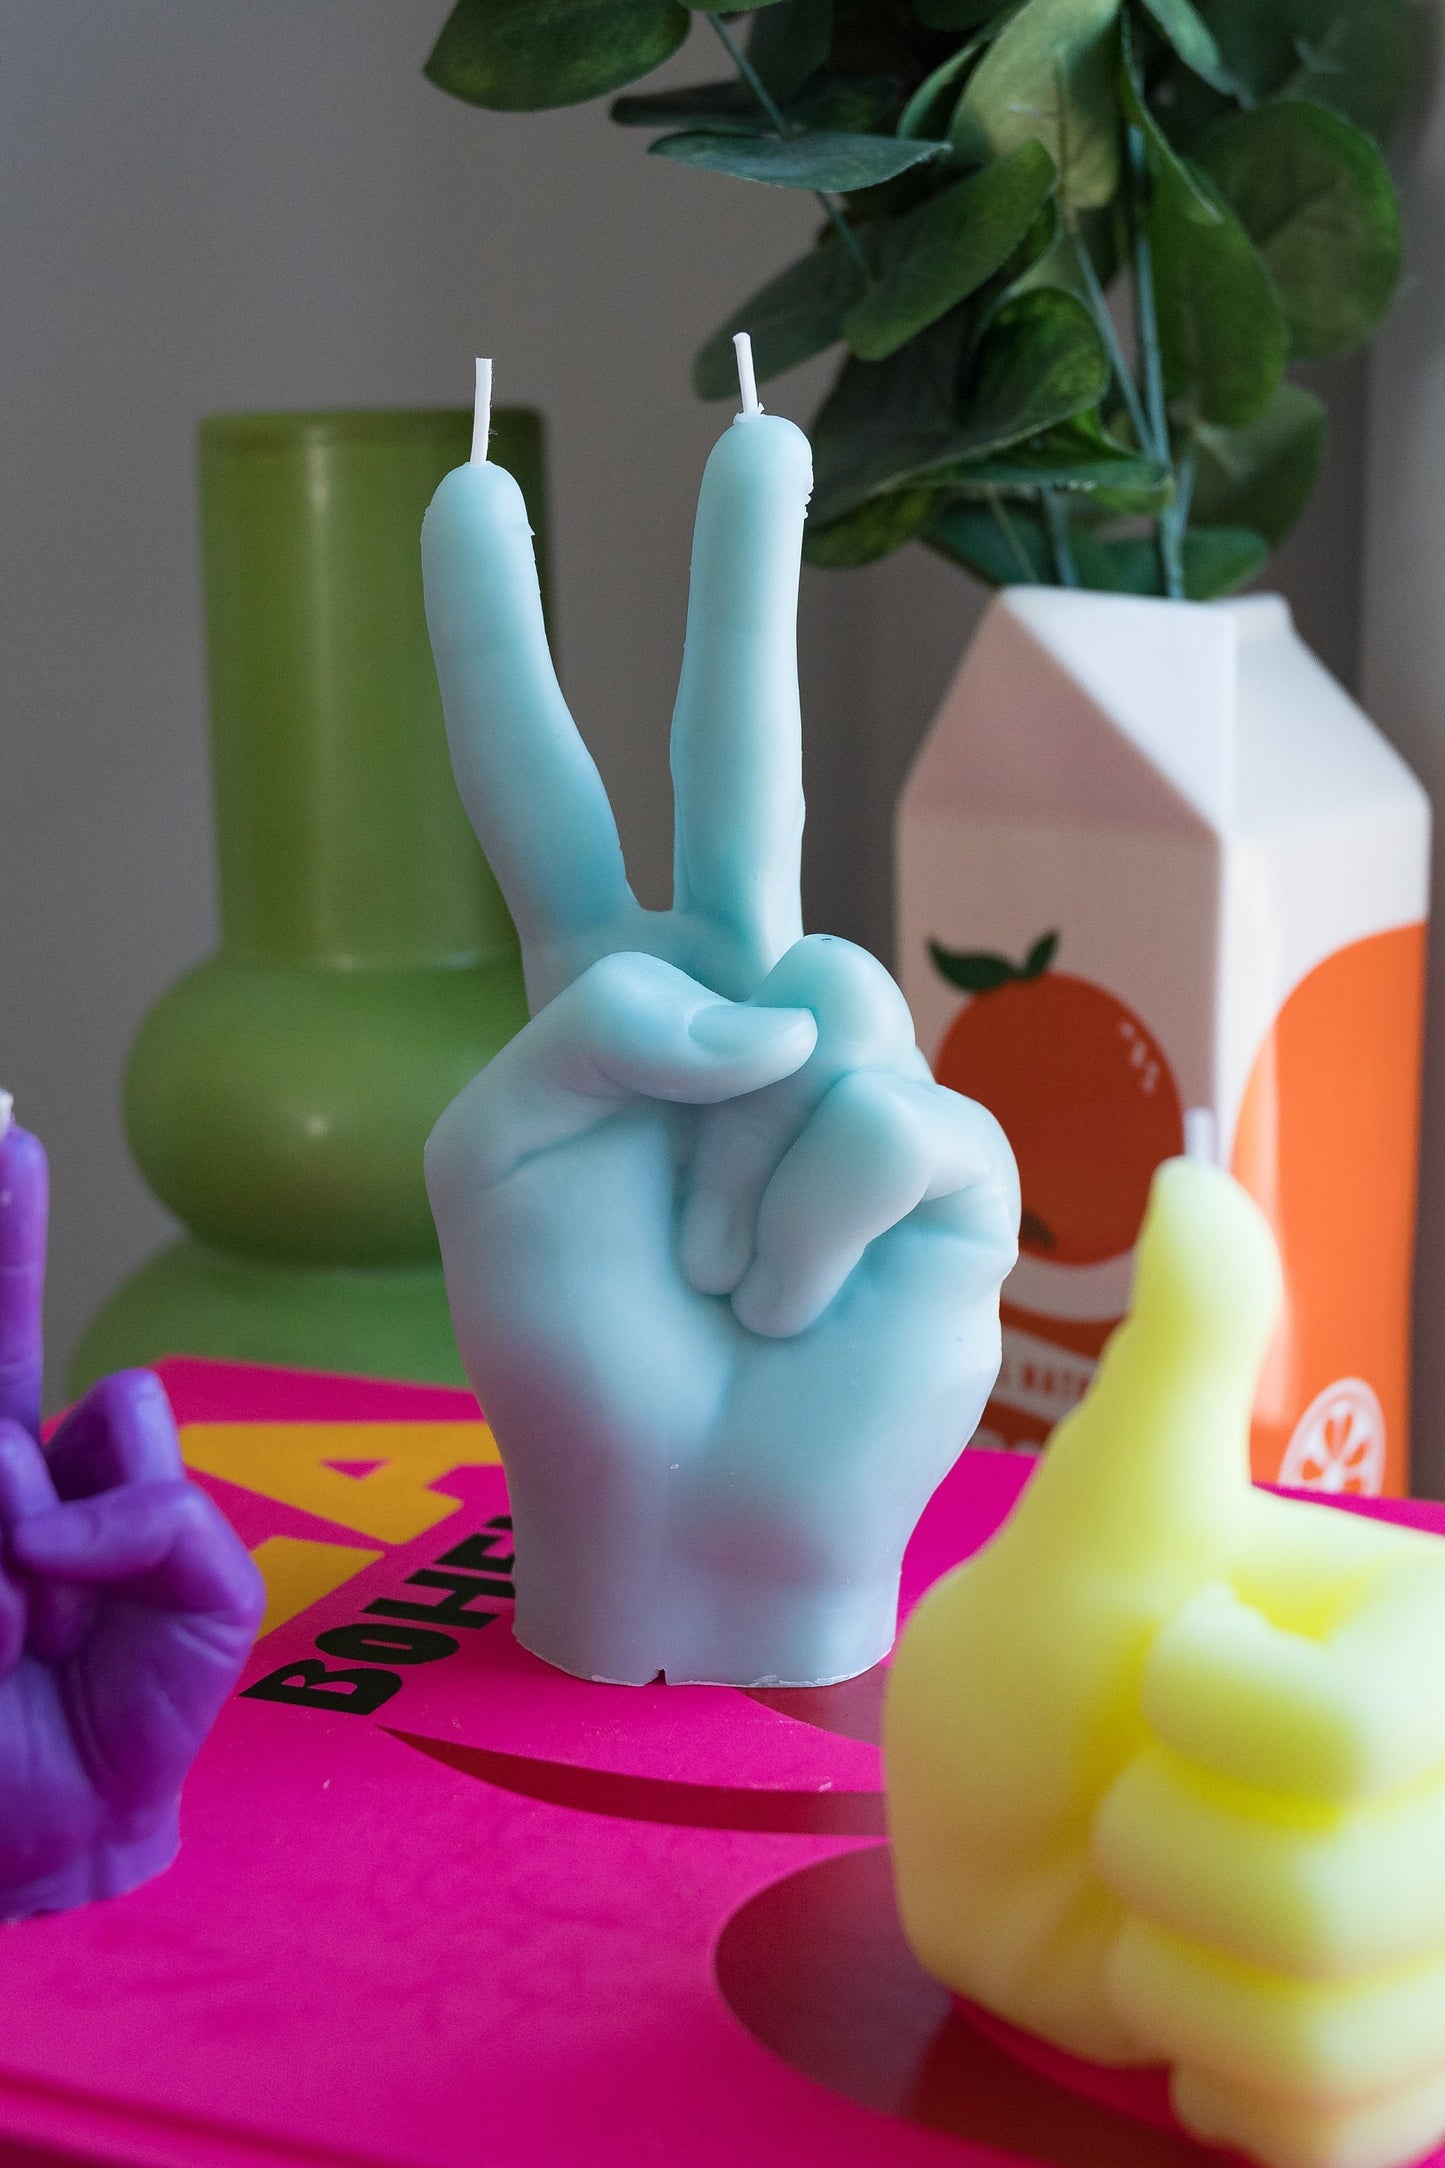 Peace Sign Candle / Hand Gesture / Peace Candle / Peace and Love / Gift Ideas / Holiday Gifts / Home Decor / Aesthetic Candle /Hippie Candle